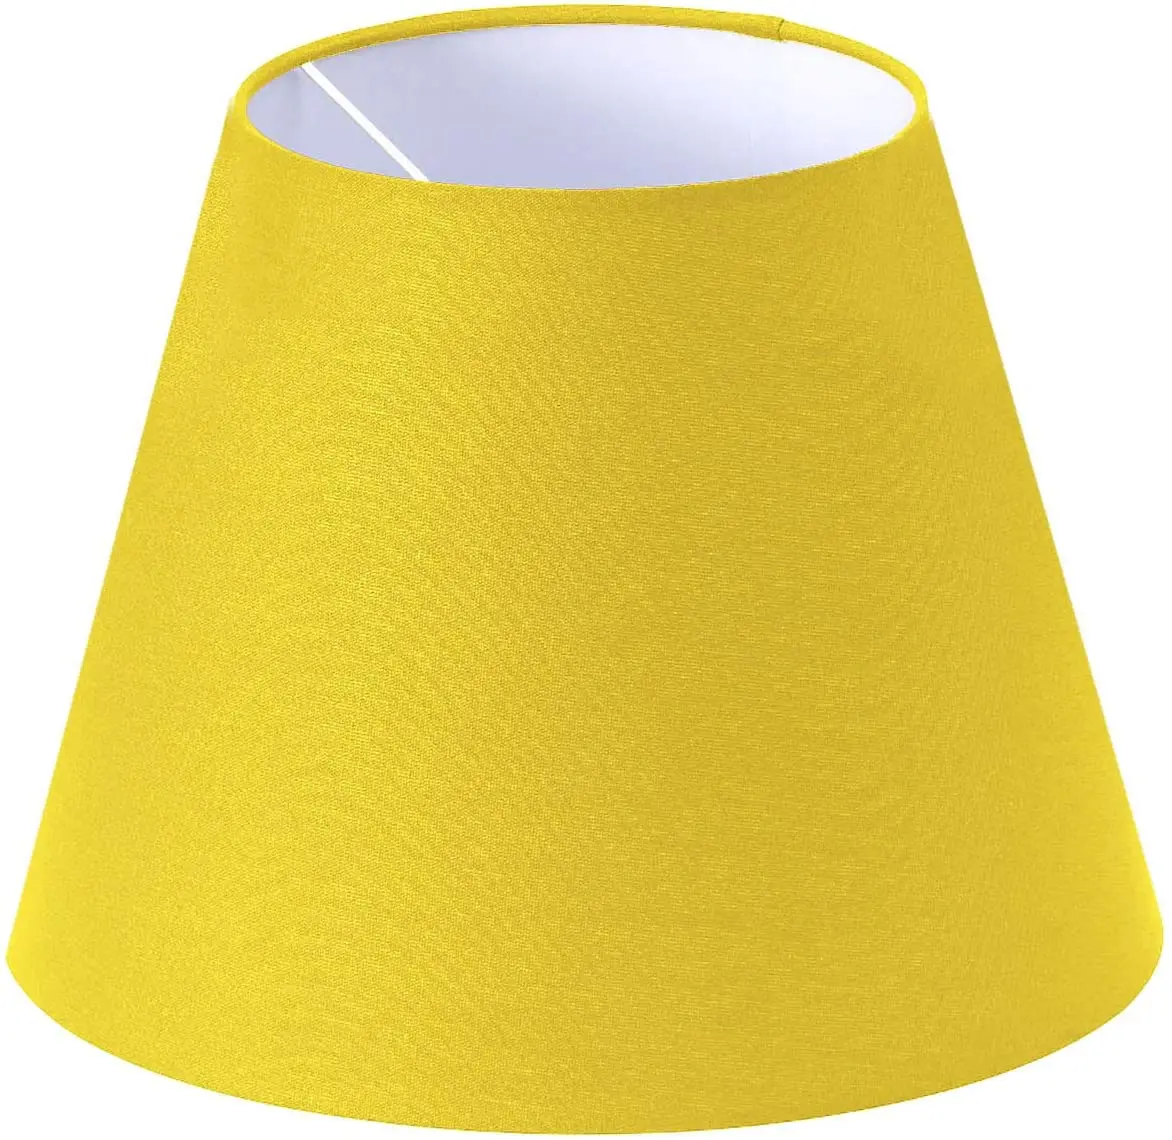 Lampshade Table Lamp Yellow Cone Lampshade 25x15x20 Cm Decorative High Quality Special Lampshade Fabric and metal Inner Nes